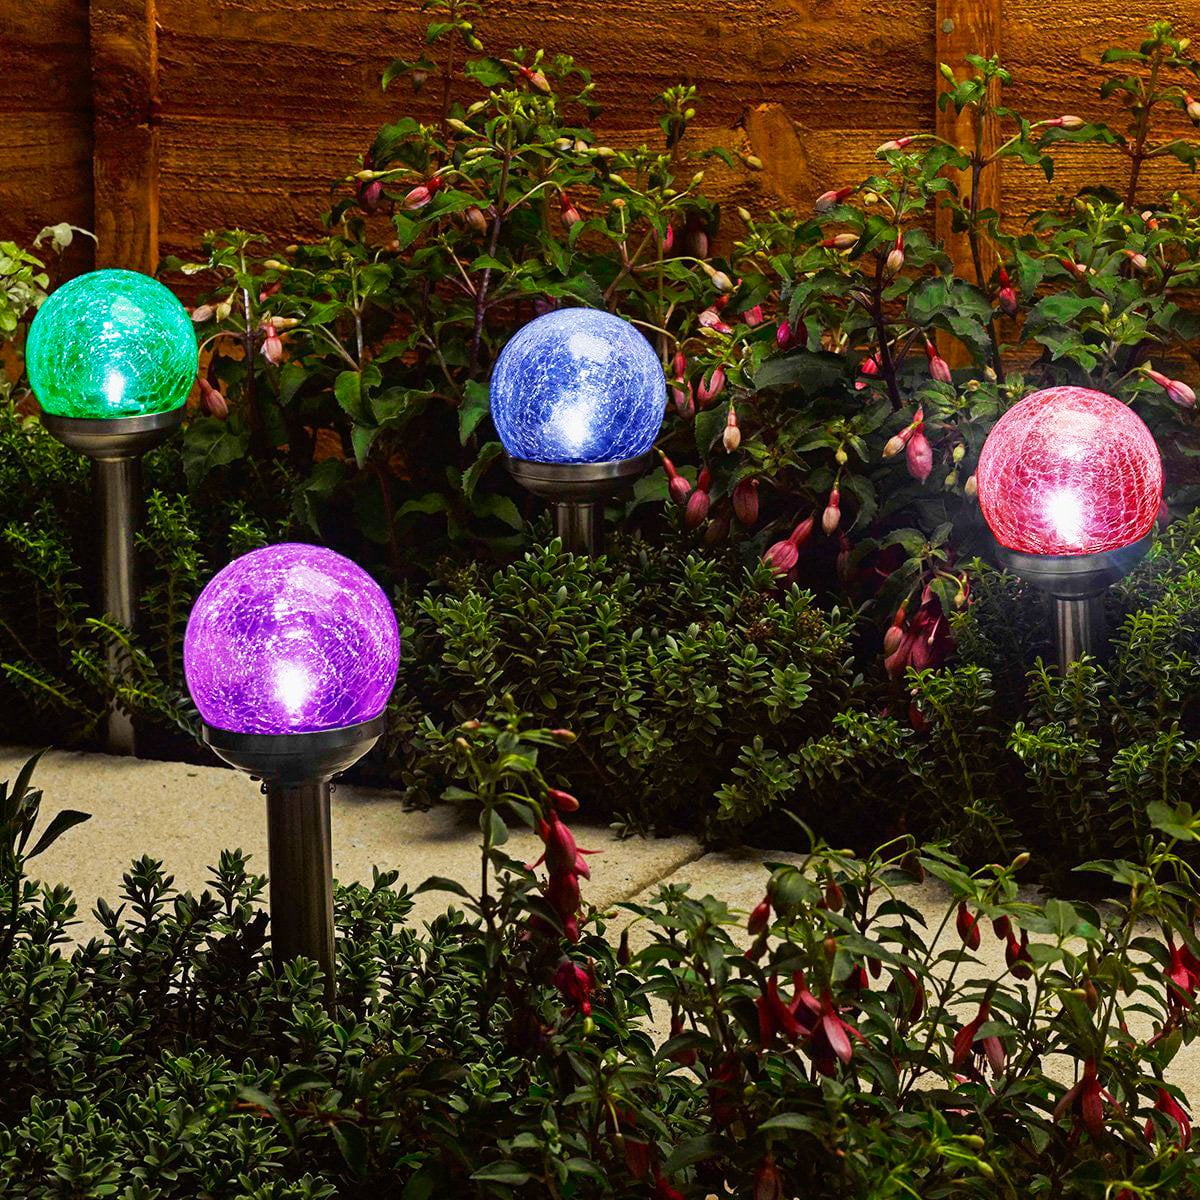 Garden Stake Lights Solar Powered Crackle Glass Globe Lights Outdoor Warm White Owl LED Lights for Yard Lawn Patio Pathway Walkway Solar Owl Lights Waterproof Decor Solar Garden Lights Outdoor 